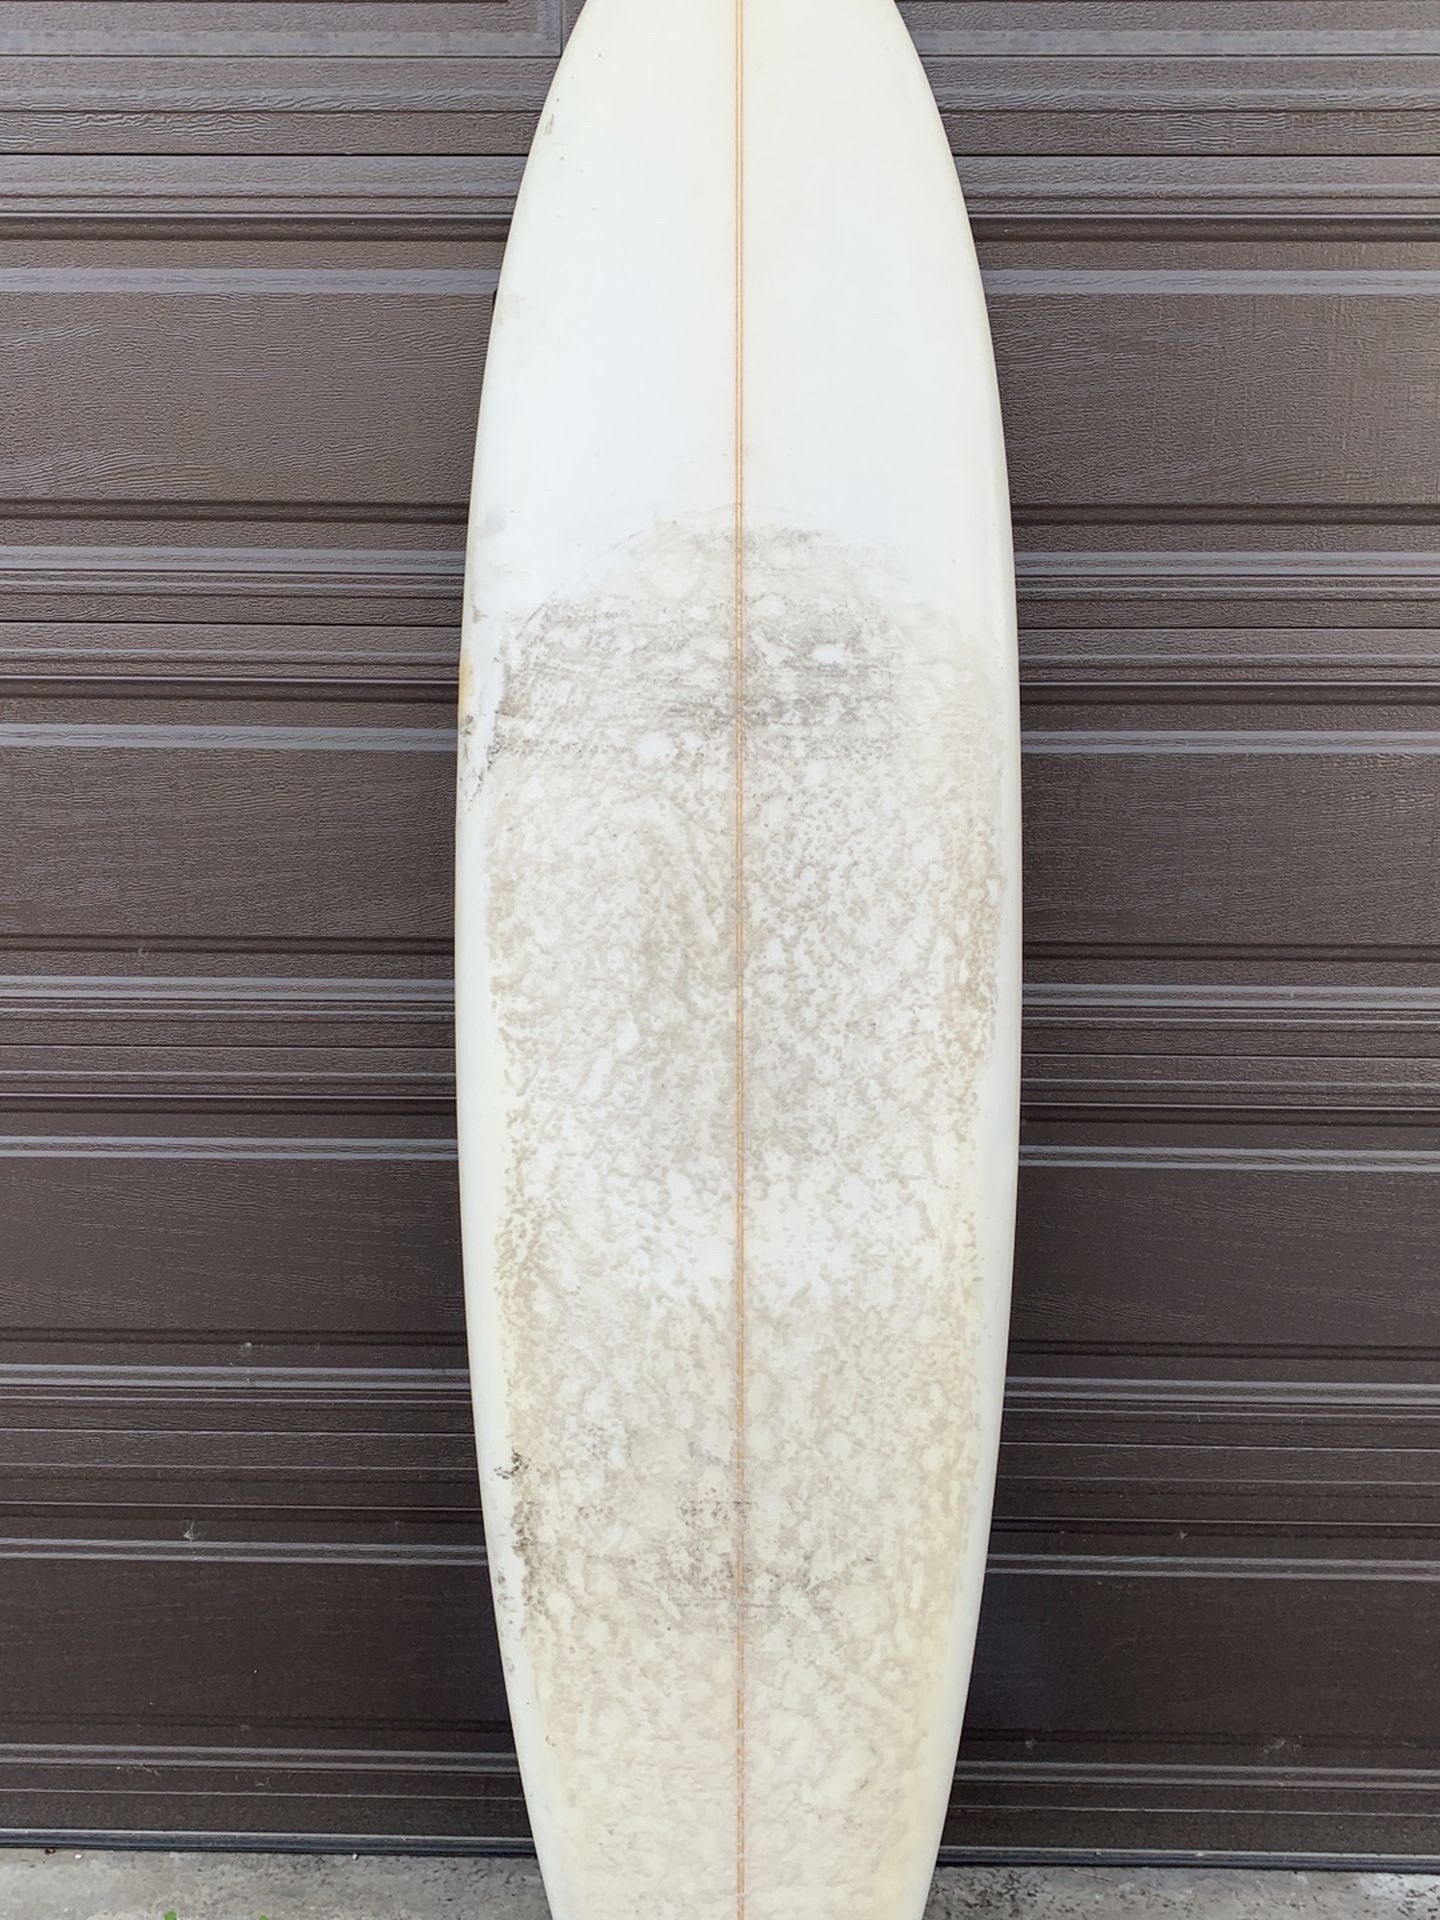 7’6” Stoker V-Machine Surfboard with fins